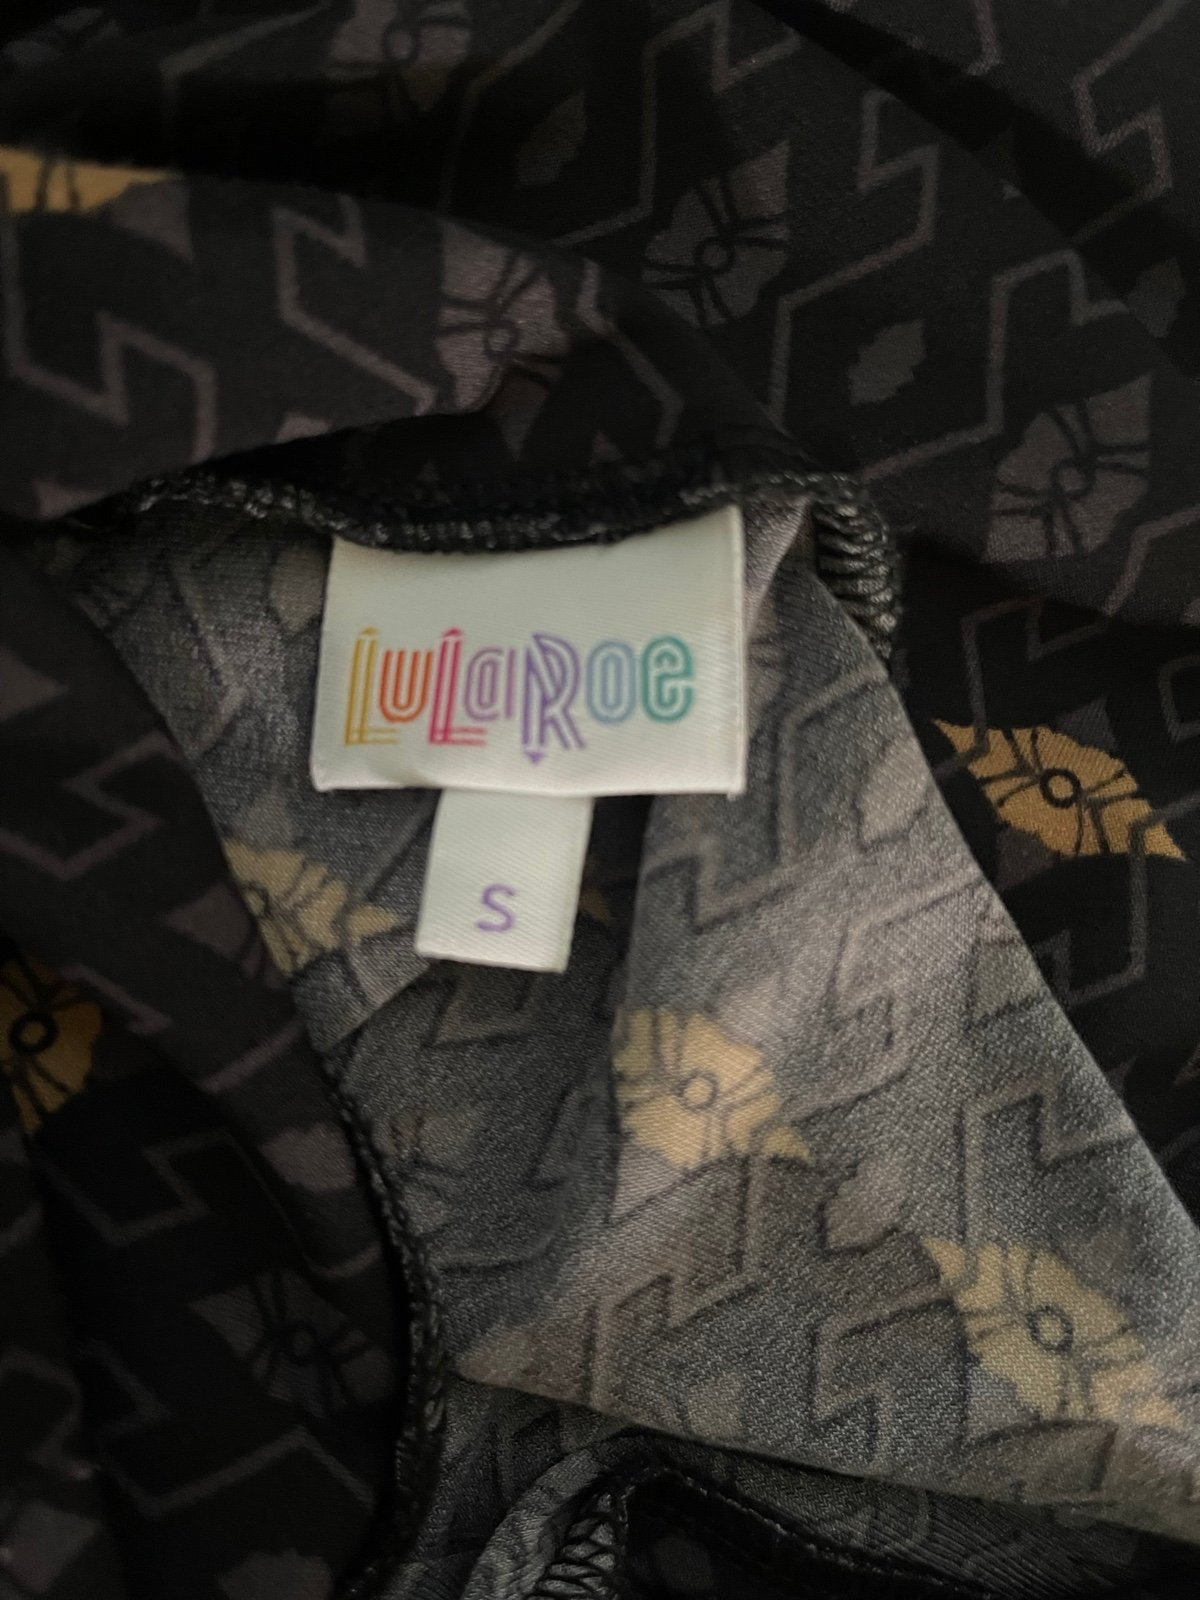 Discounted Lularoe Women’s Maxi Skirts Long Like New Size Small Ma3g5koTN just for you